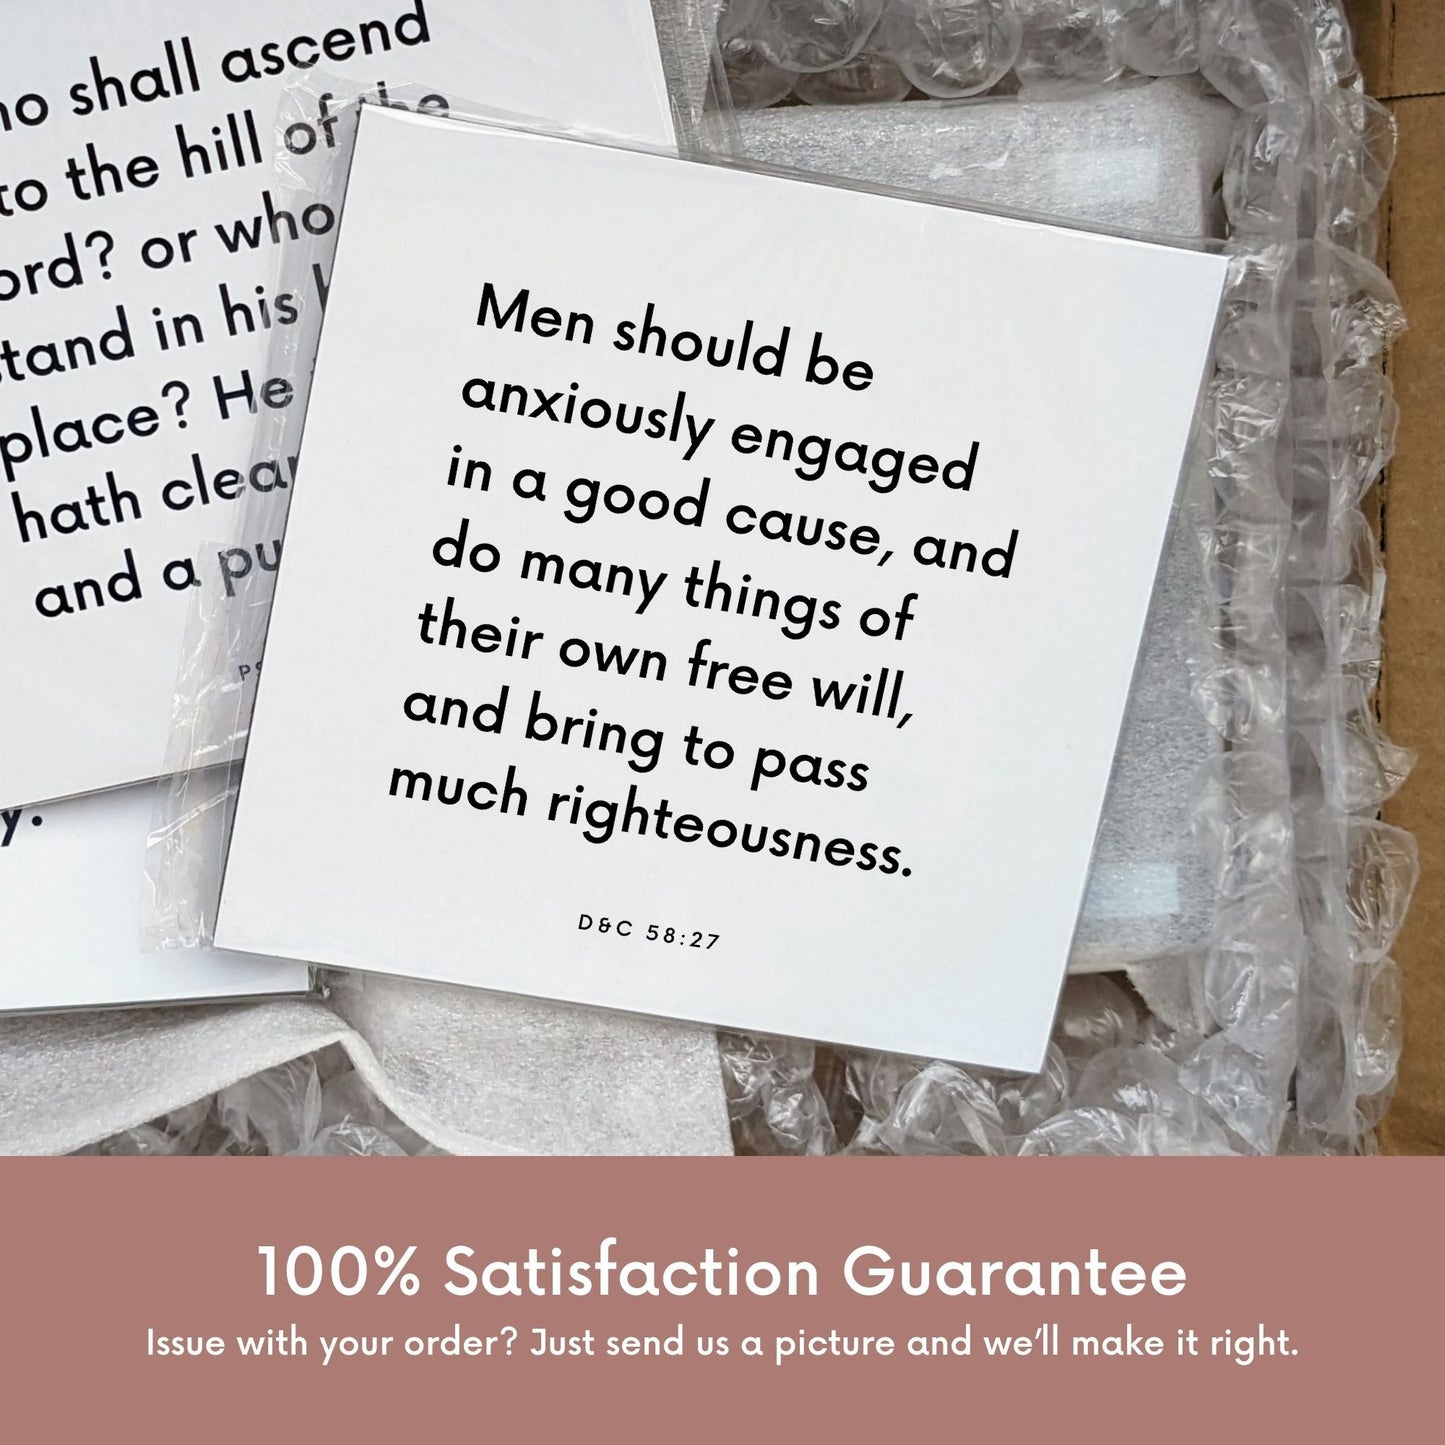 Shipping materials for scripture tile of D&C 58:27 - "Men should be anxiously engaged in a good cause"